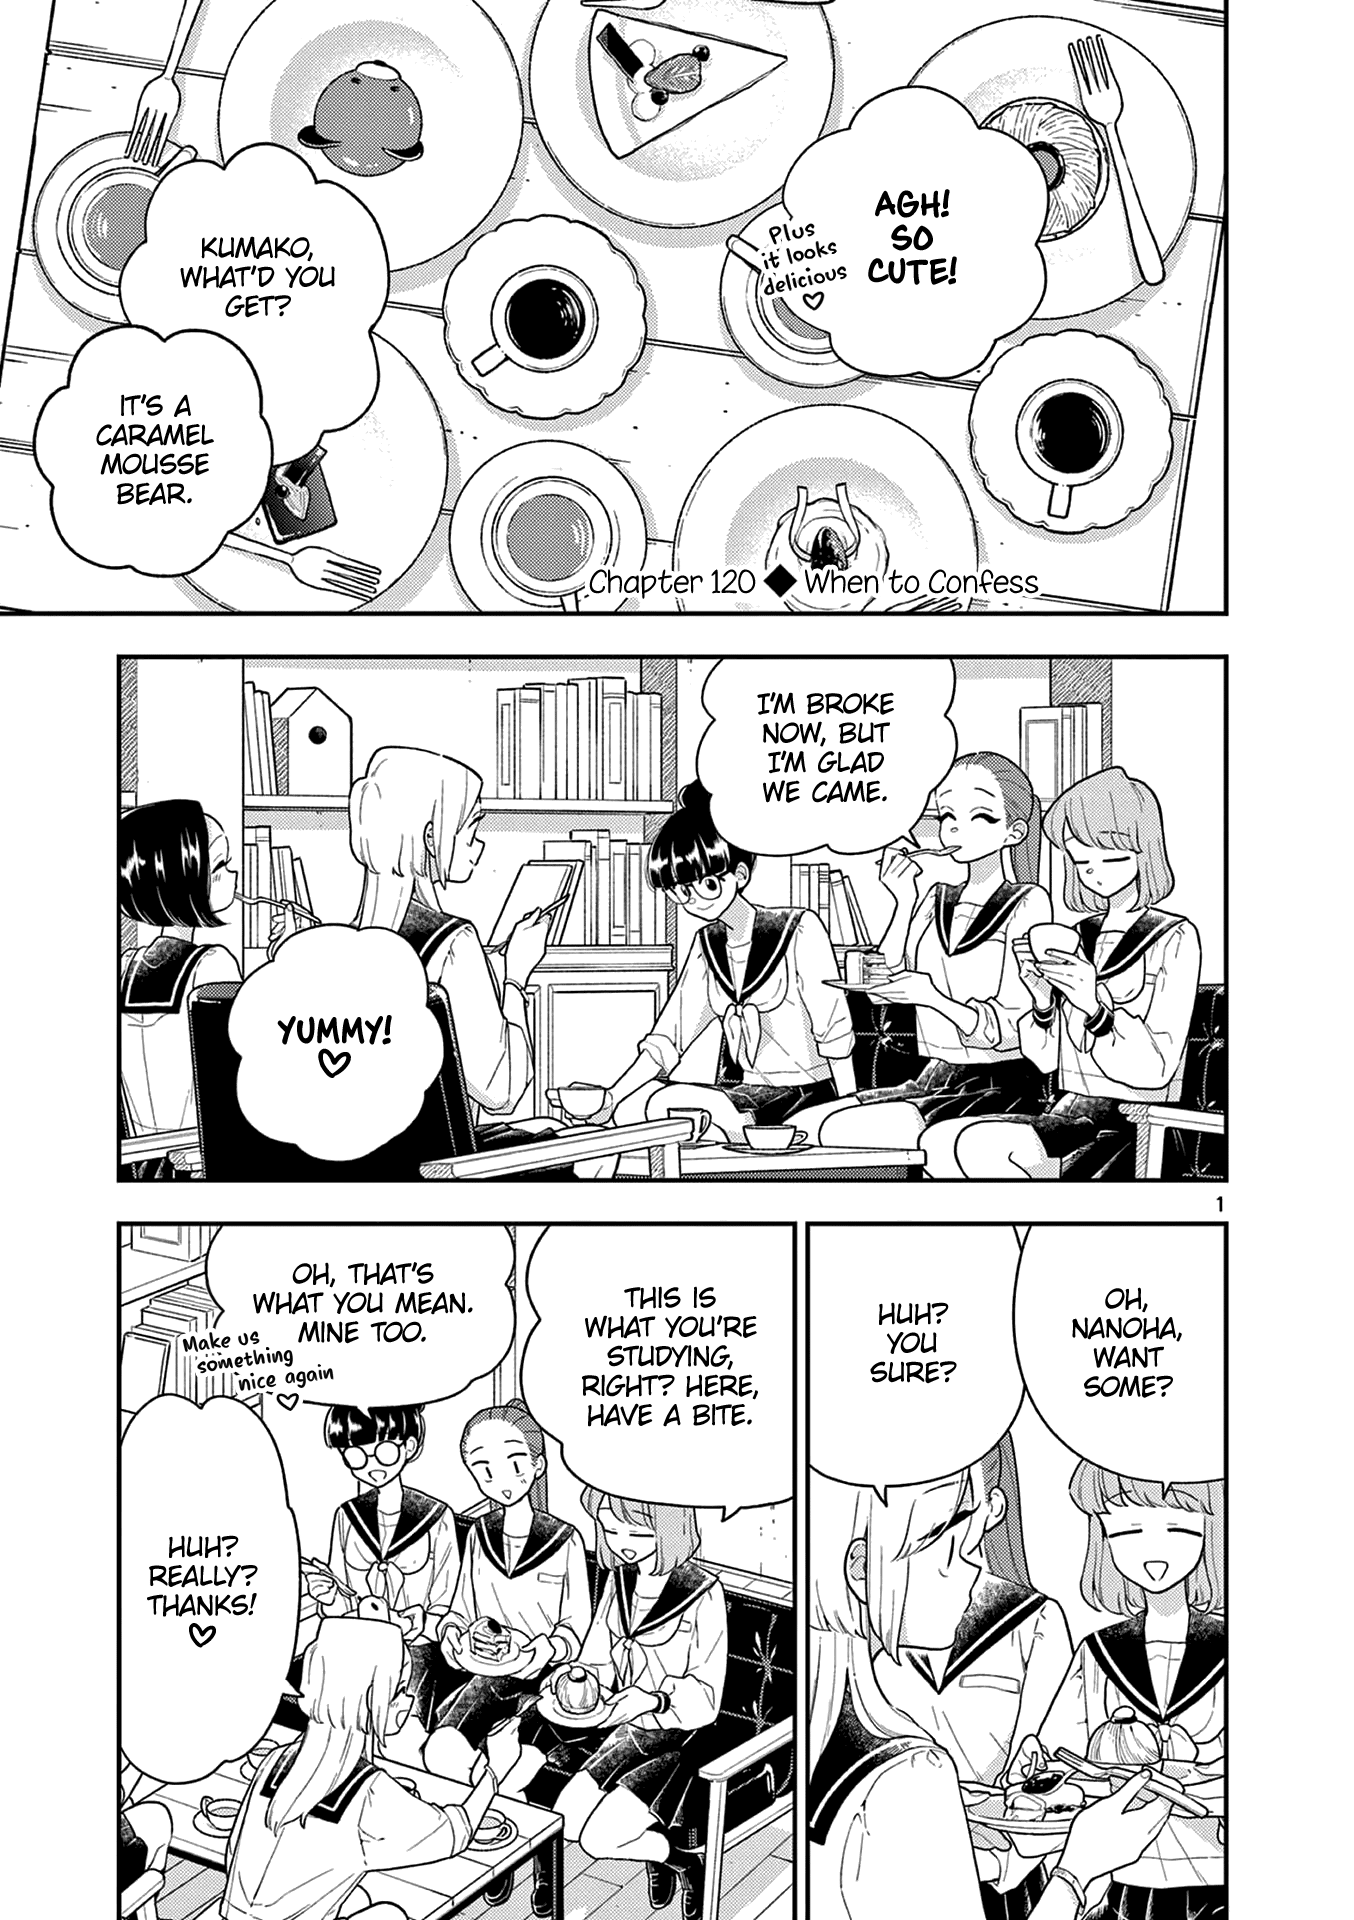 Chapter 120: When To Confess